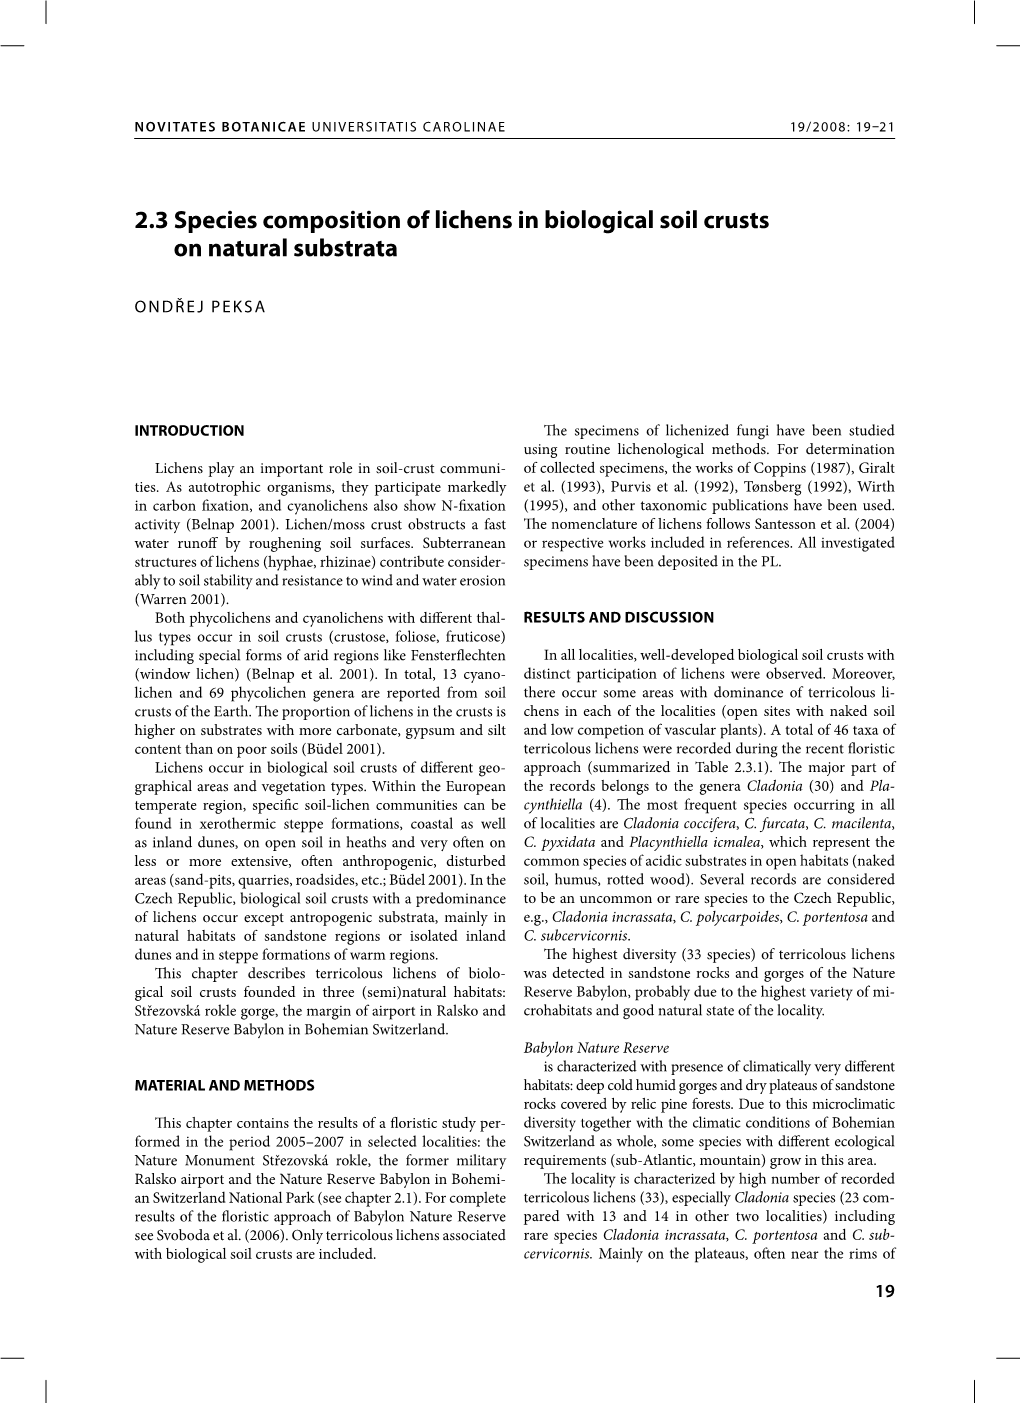 2.3 Species Composition of Lichens in Biological Soil Crusts on Natural Substrata